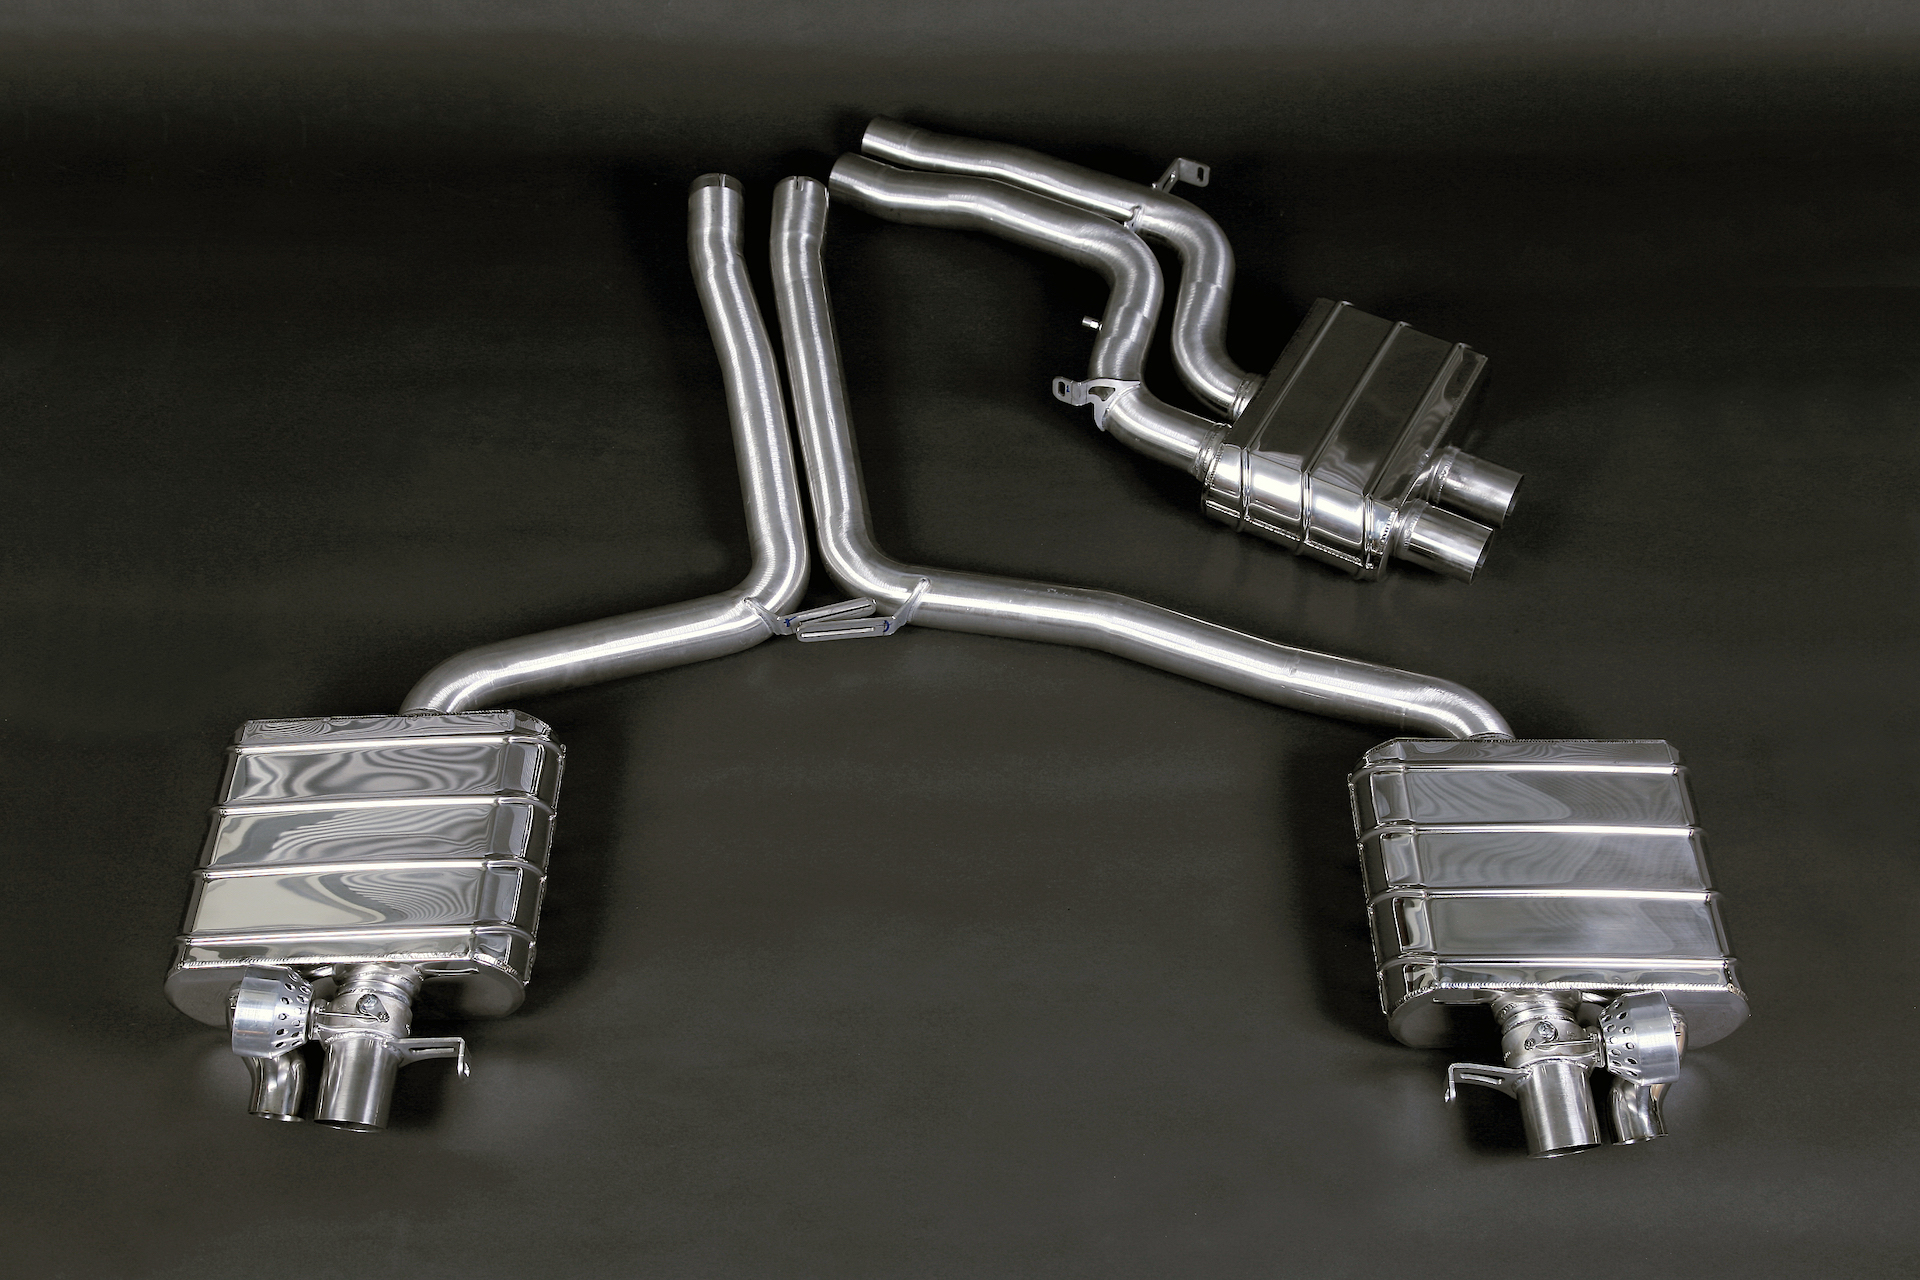 Capristo RS5 (B8) Valved Exhaust System & Mid-Pipes (No Remote)